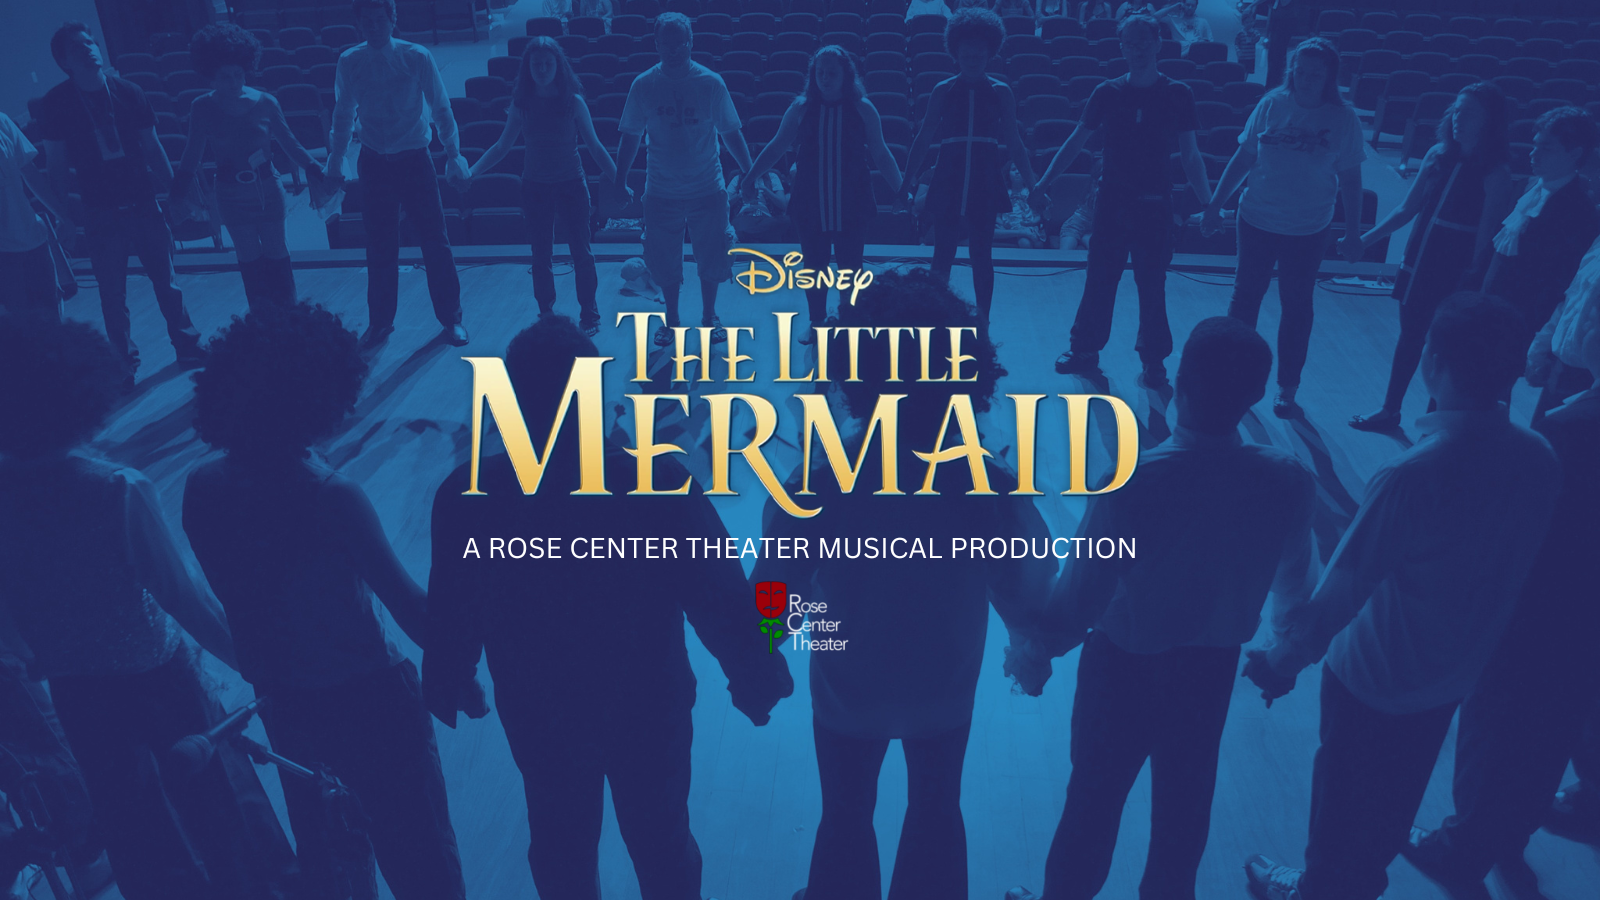 Adrienne Amanda Morrow in Disney's The Little Mermaid at Rose Center Theater - February 18 through March 5, 2023